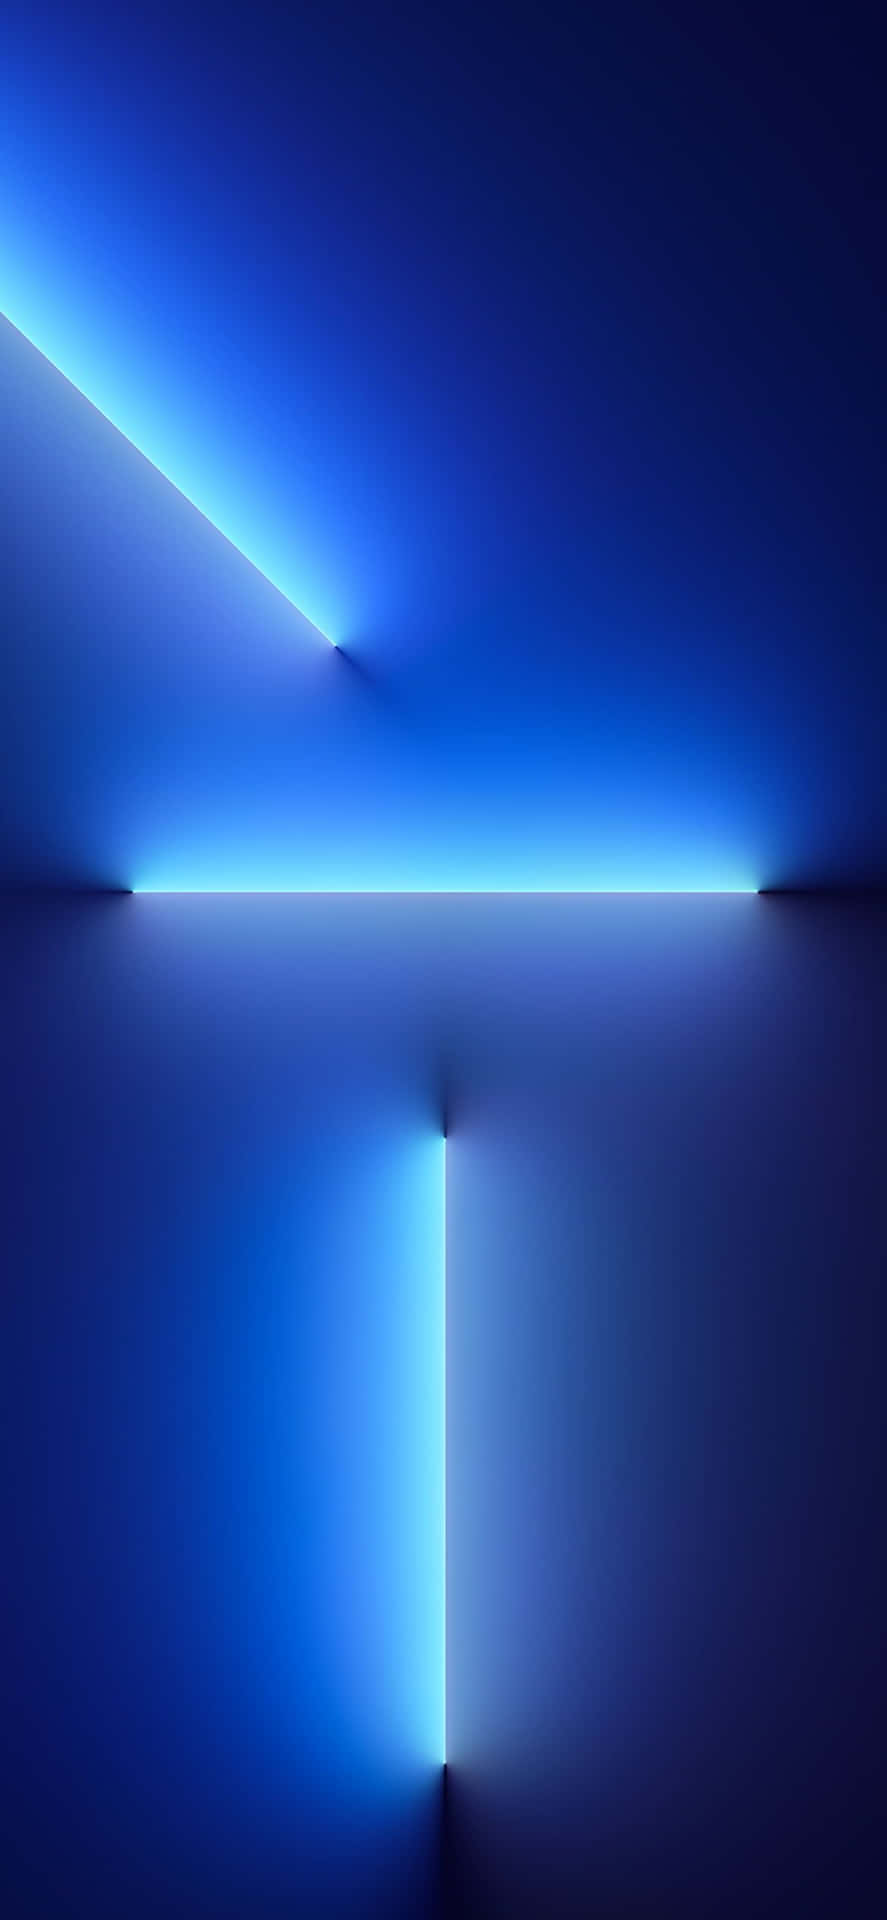 A Blue Light Is Shining On A Dark Background